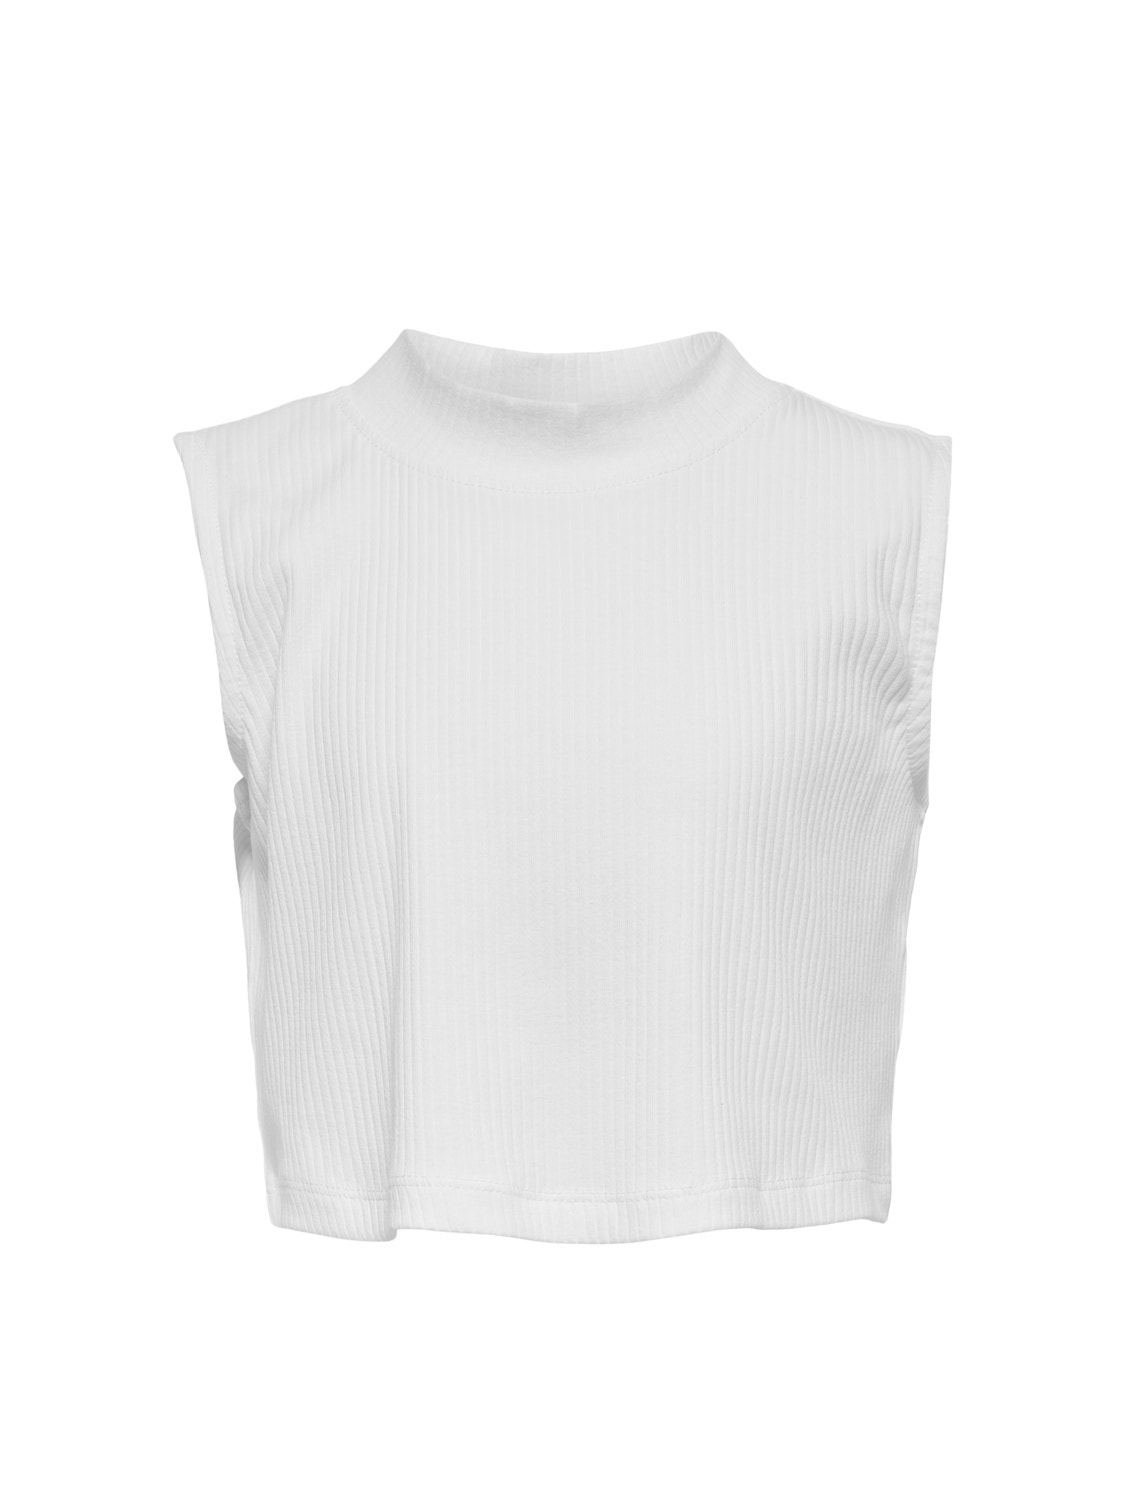 ONLY Cropped High Neck Top -Bright White - 15264306